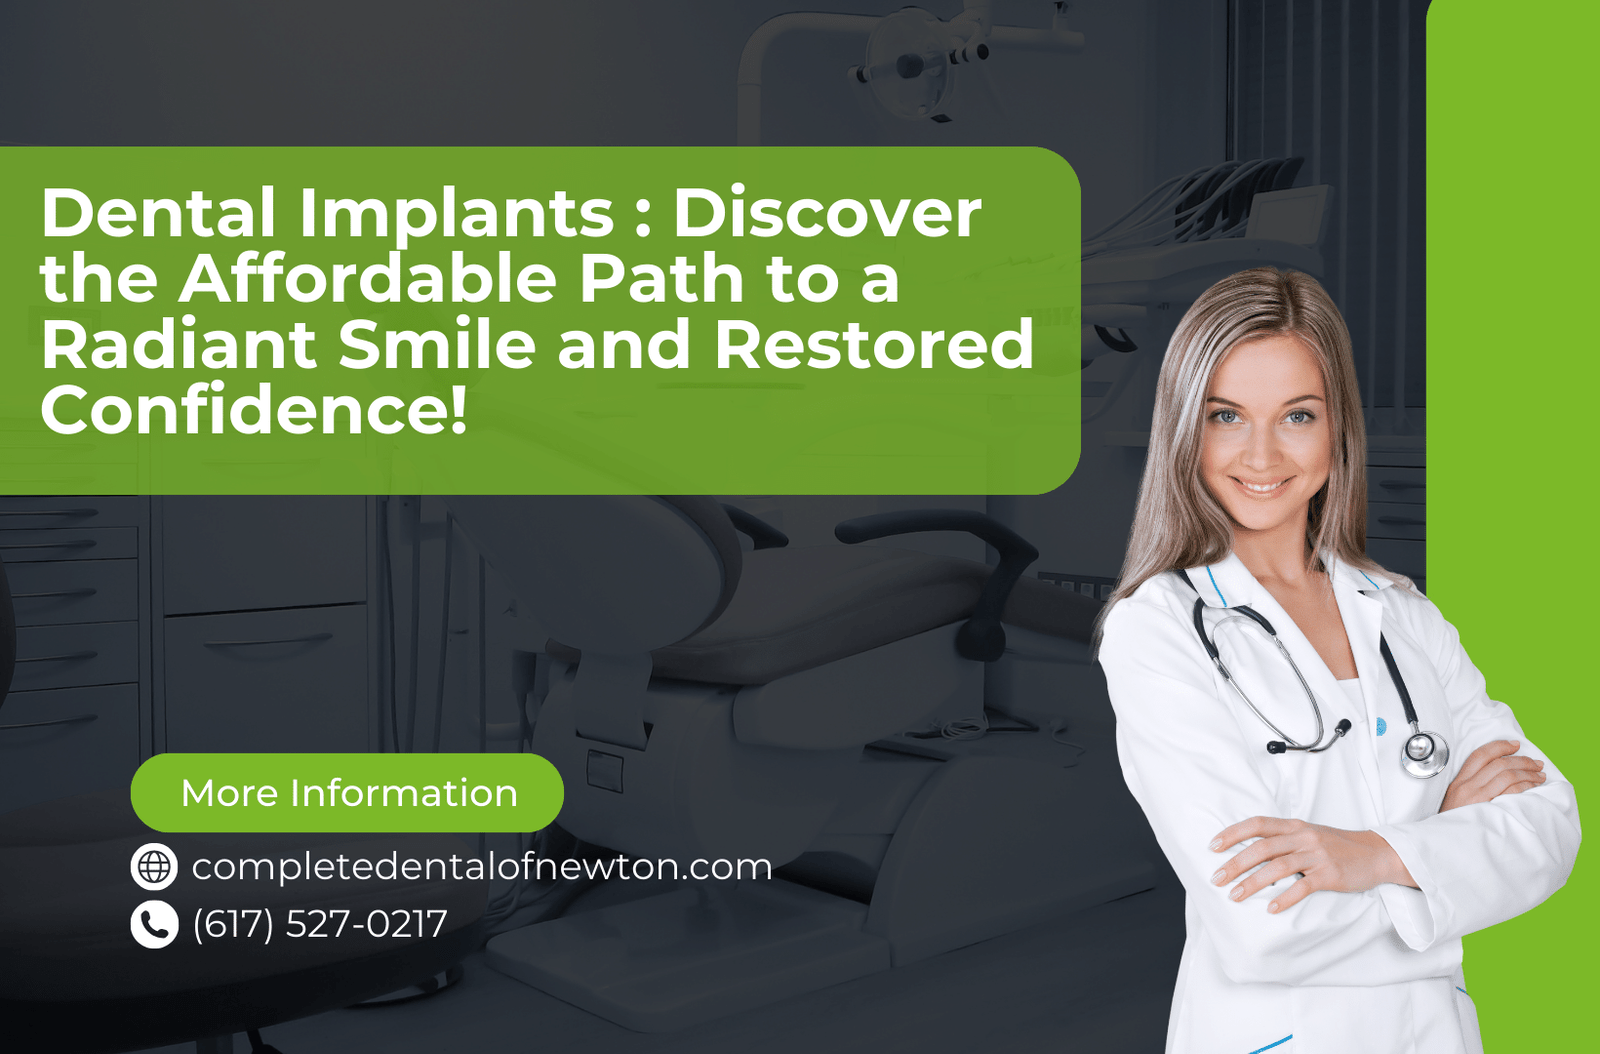 Dental Implants Discover the Affordable Path to a Radiant Smile and Restored Confidence!